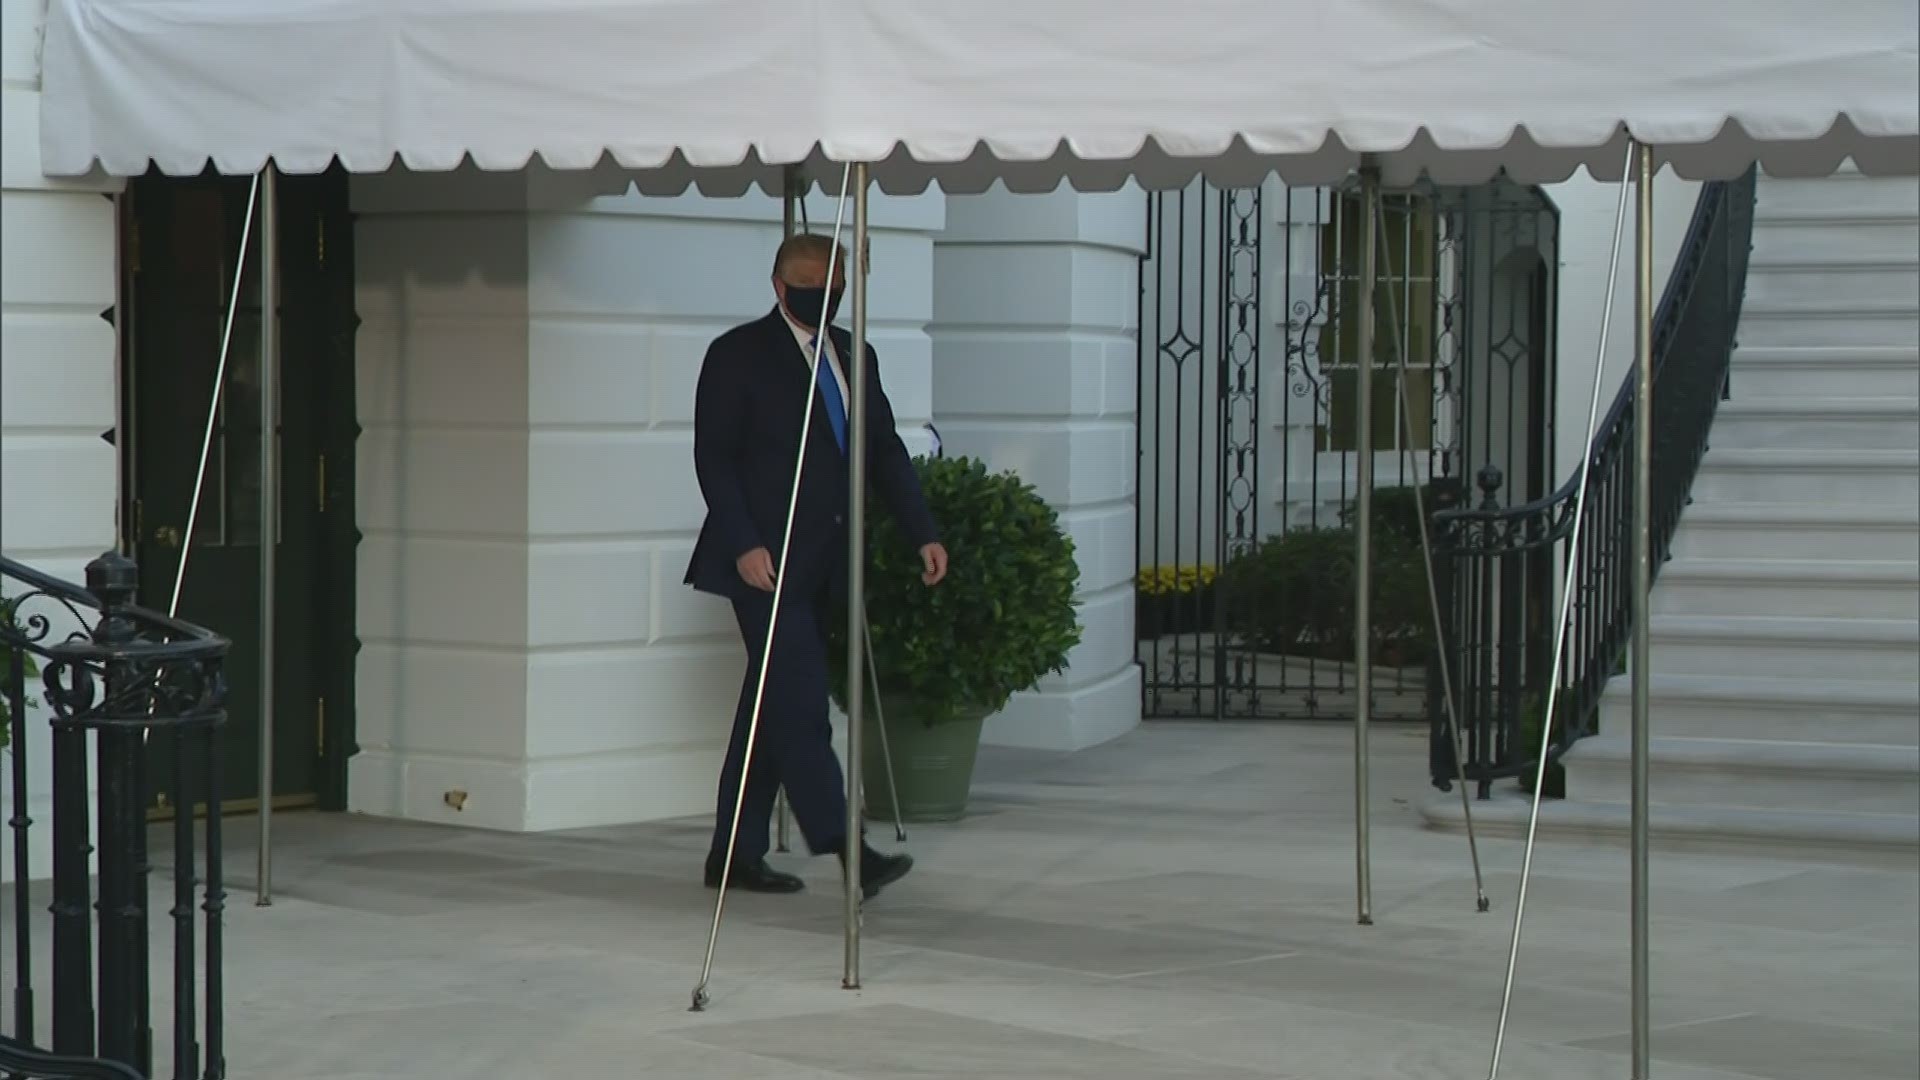 President Trump departed the White House by helicopter early Friday evening for Walter Reed National Military Medical Center after testing positive for COVID-19.